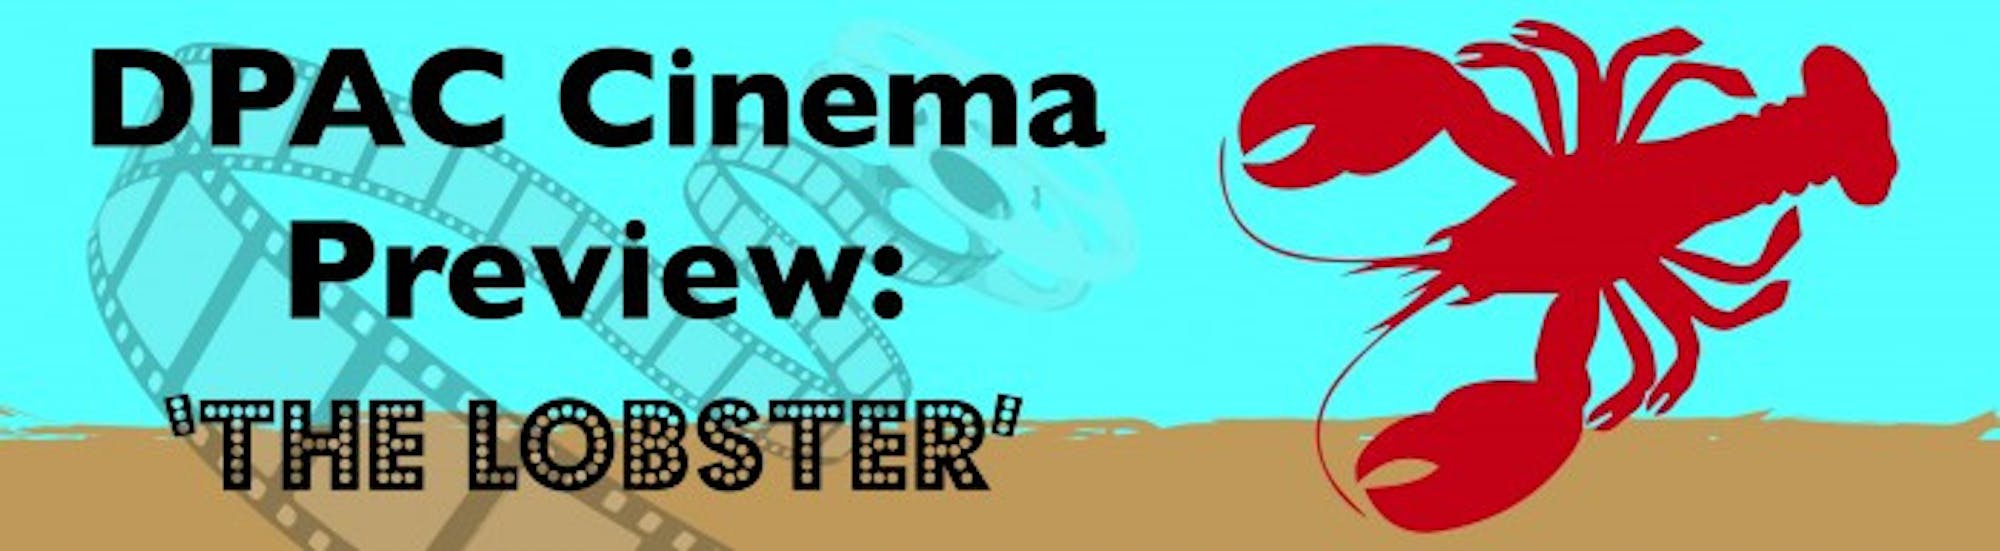 DPAC Cinema Preview %22The Lobster%22